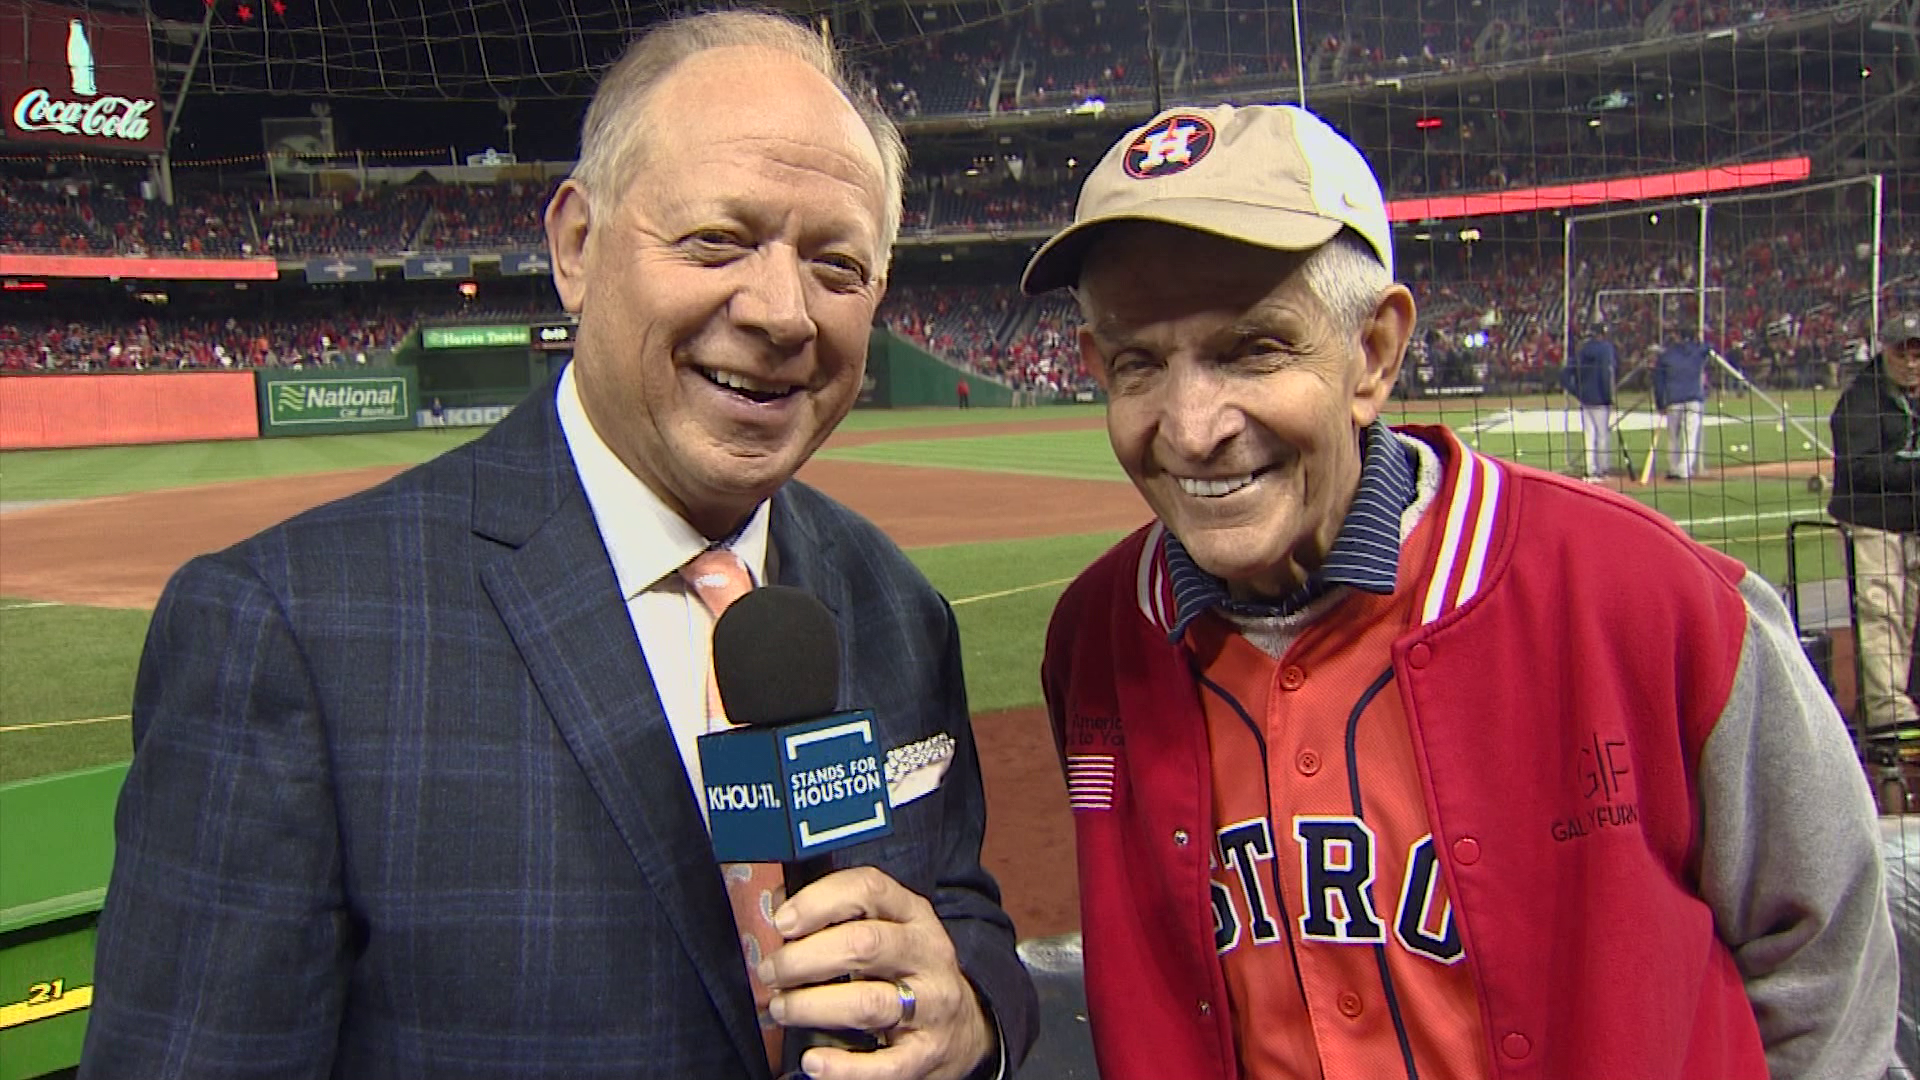 KHOU 11 Sports' Matt Musil caught up with Jim "Mattress Mack" McIngvale in Washington, D.C. where he is rooting for the Astros in the World Series.